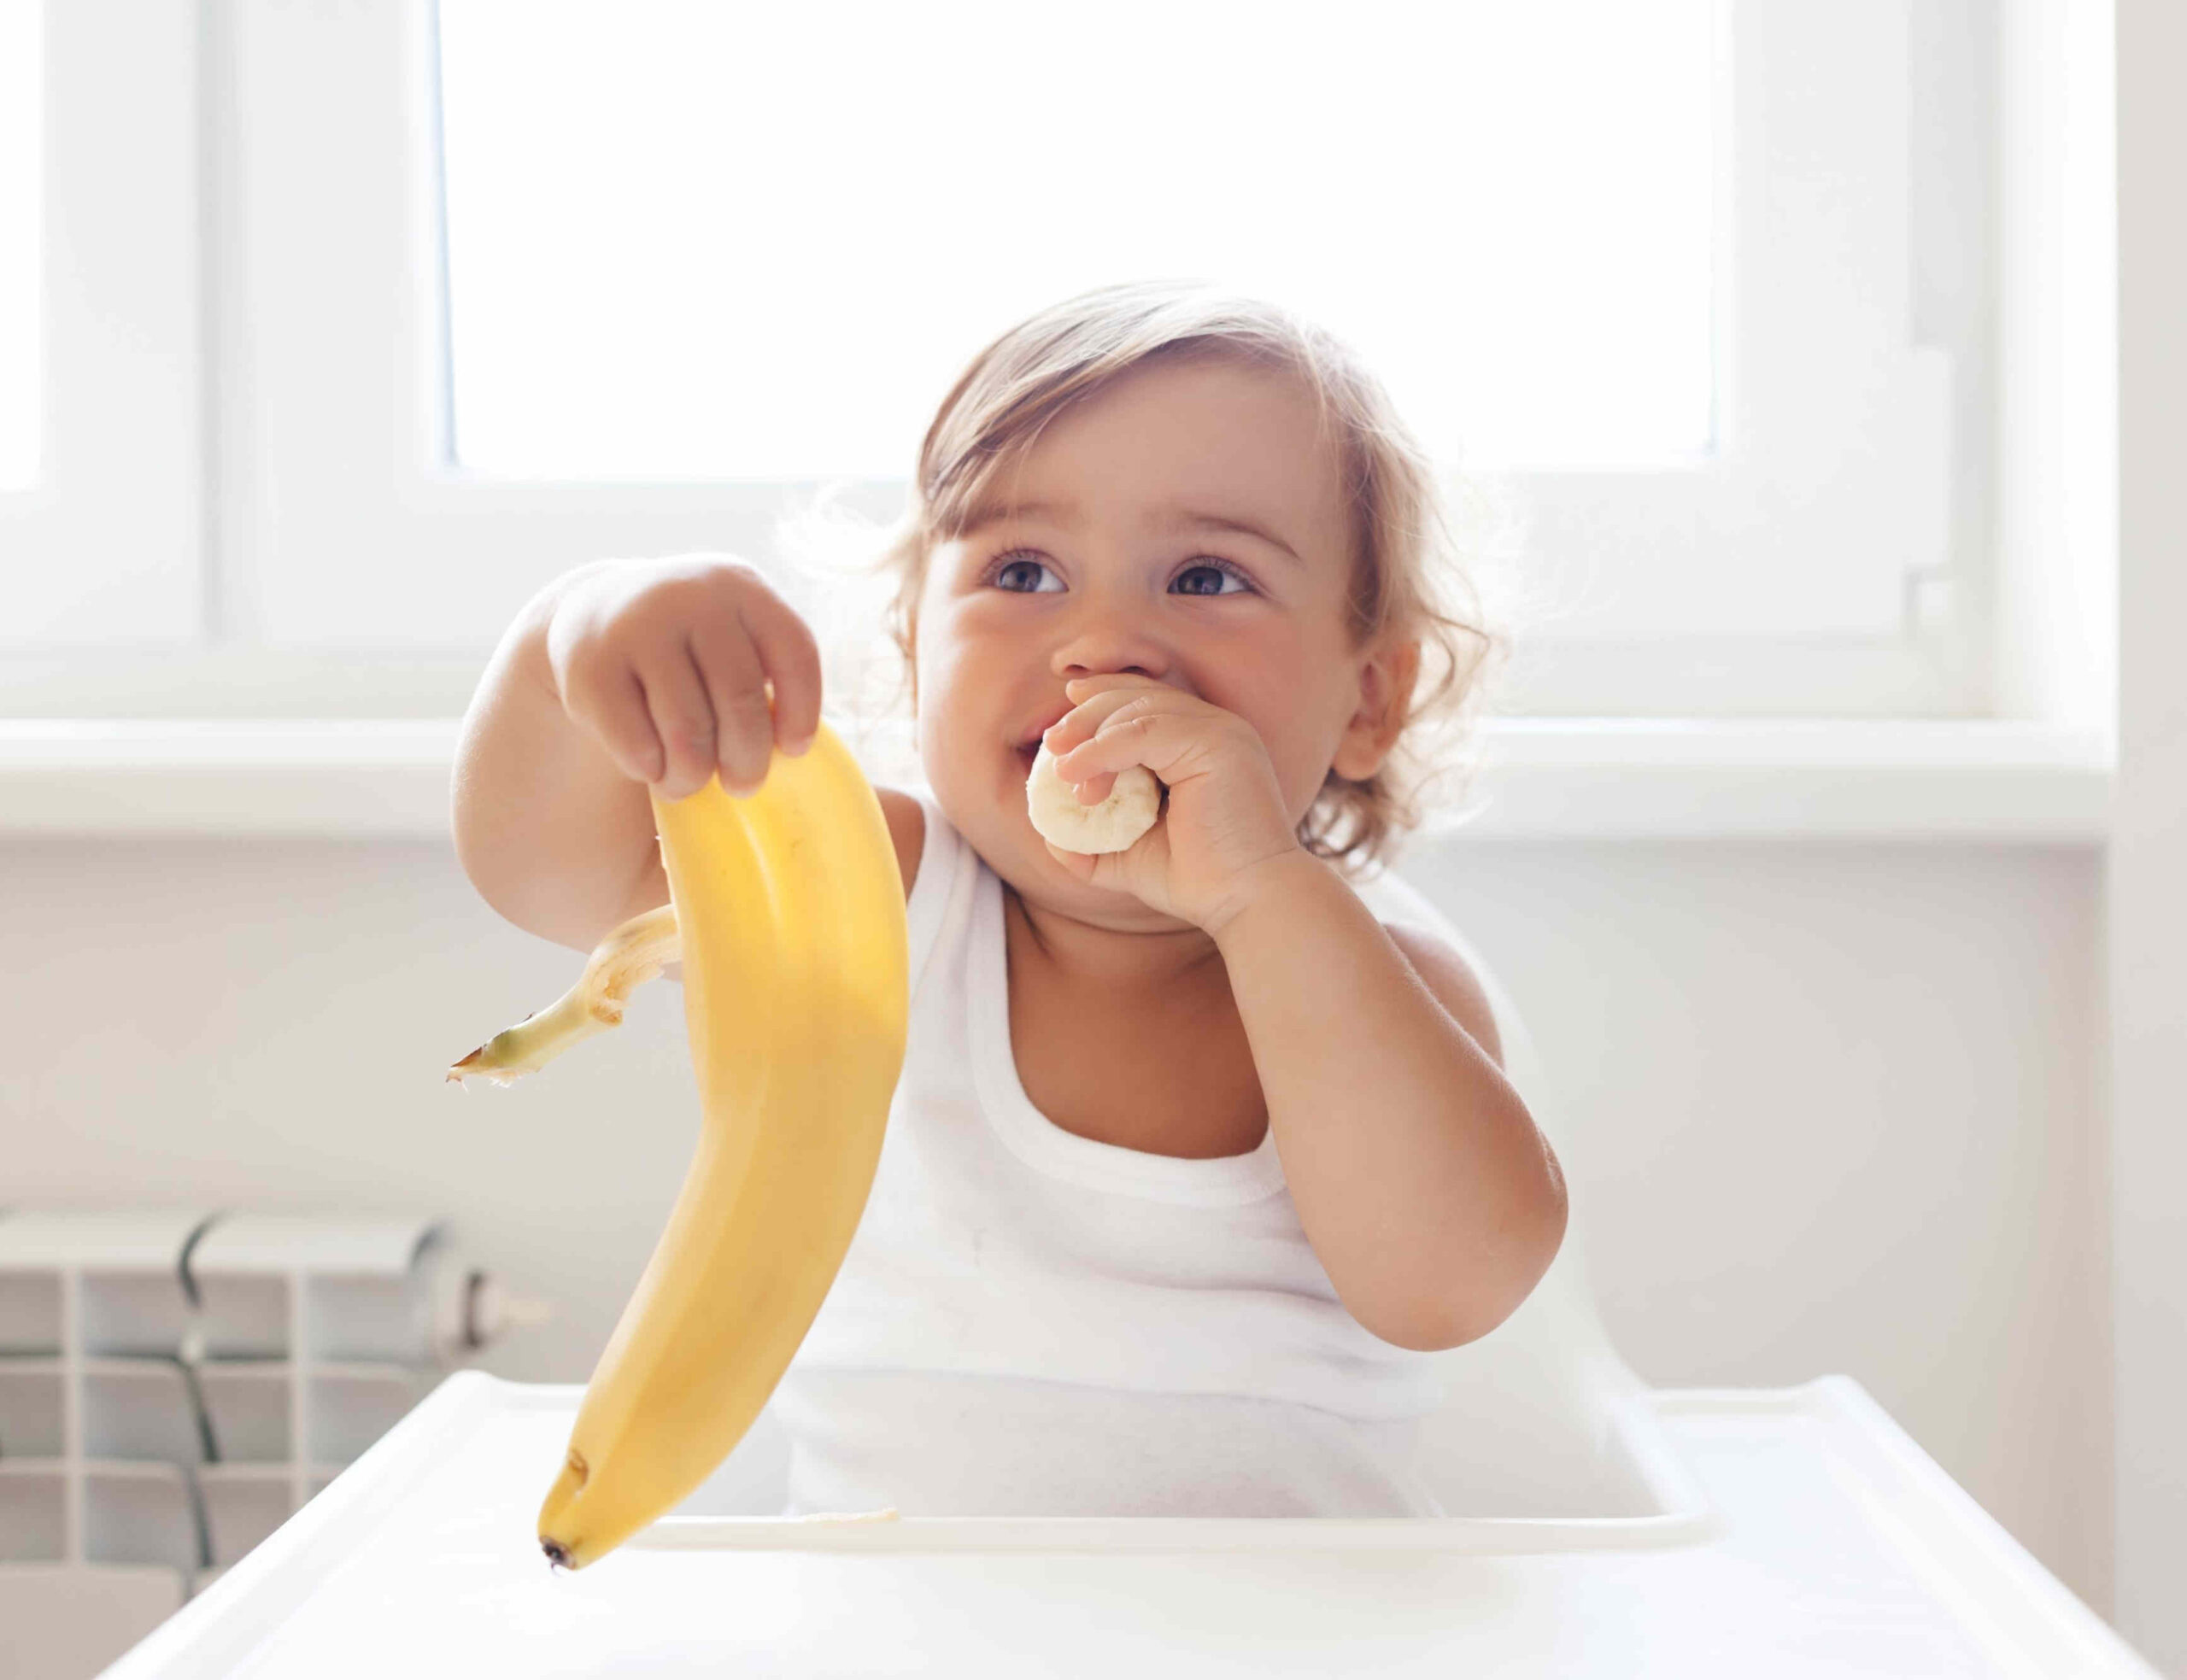 Baby eating banana with hands.